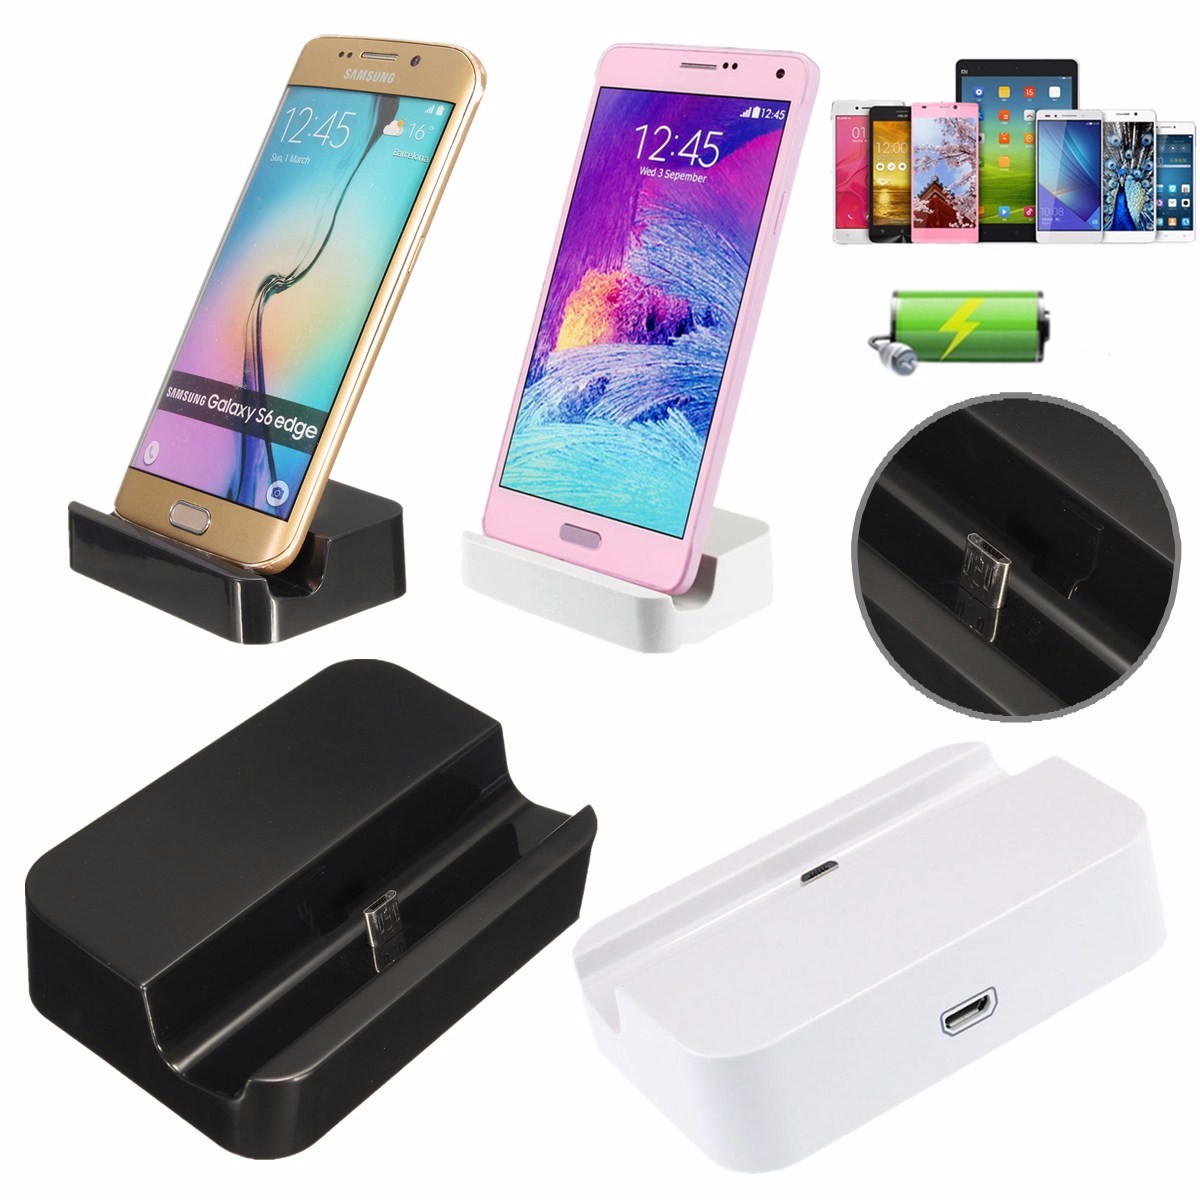 

Universal Micro USB Charging Dock Charger Base Holder For Android Phone